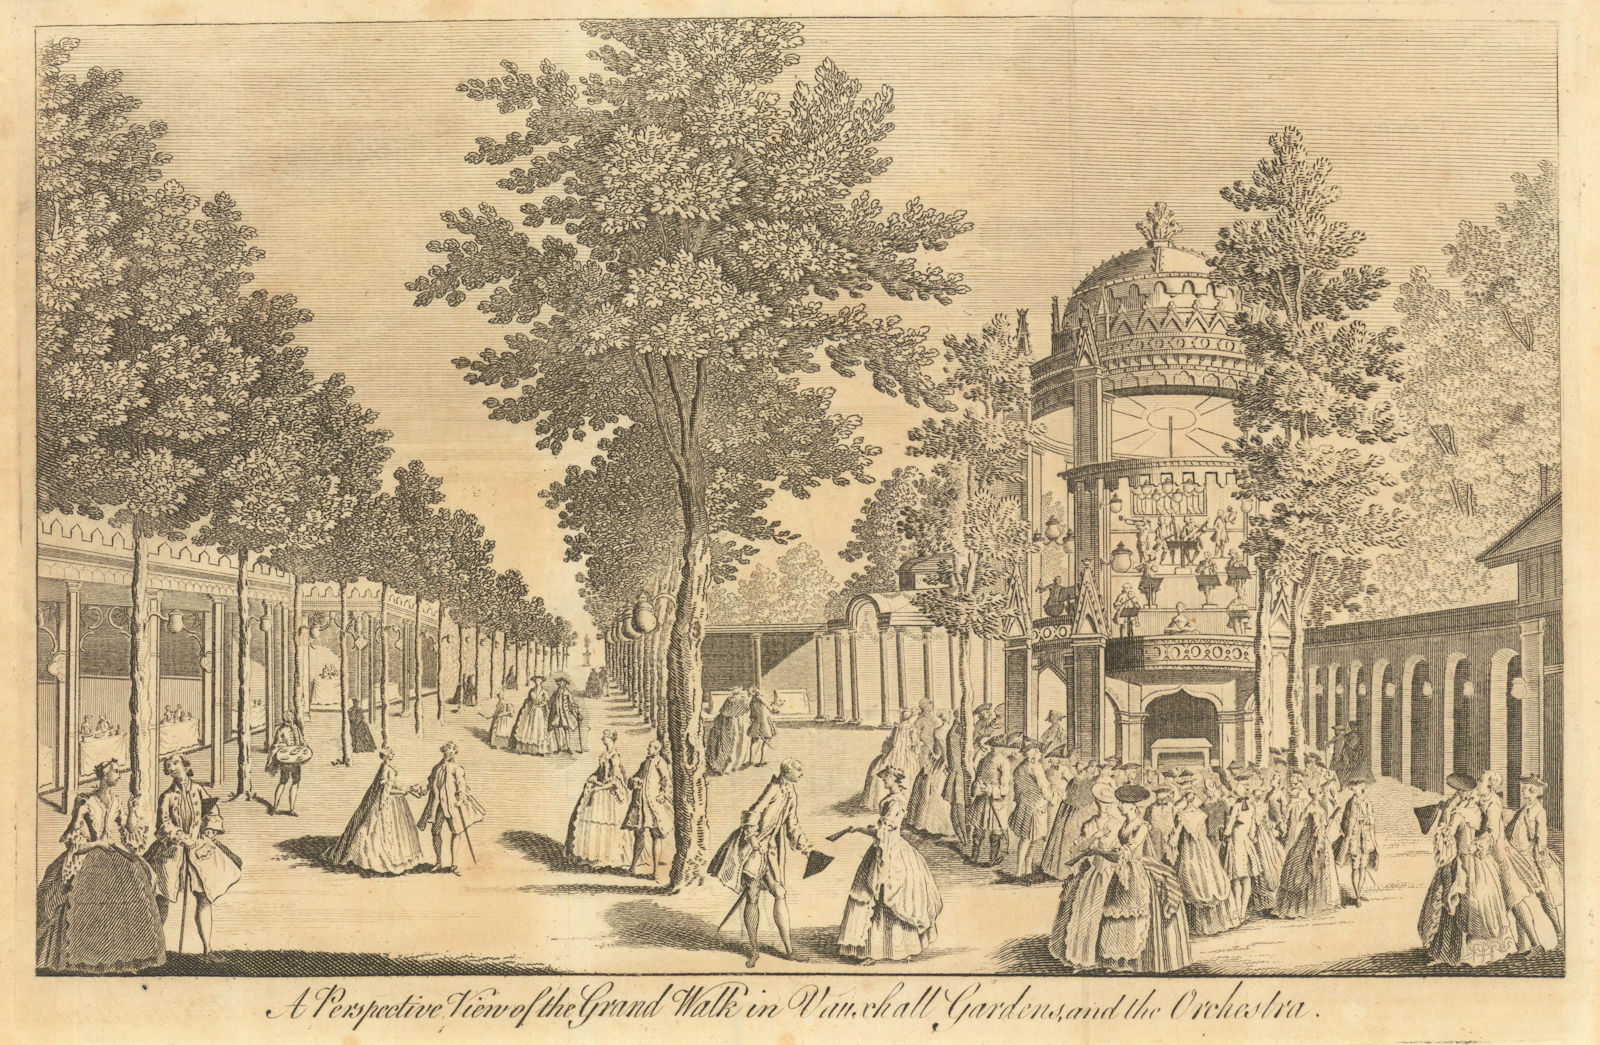 Associate Product A perspective view of the Grand Walk in Vauxhall Gardens and the Orchestra 1765